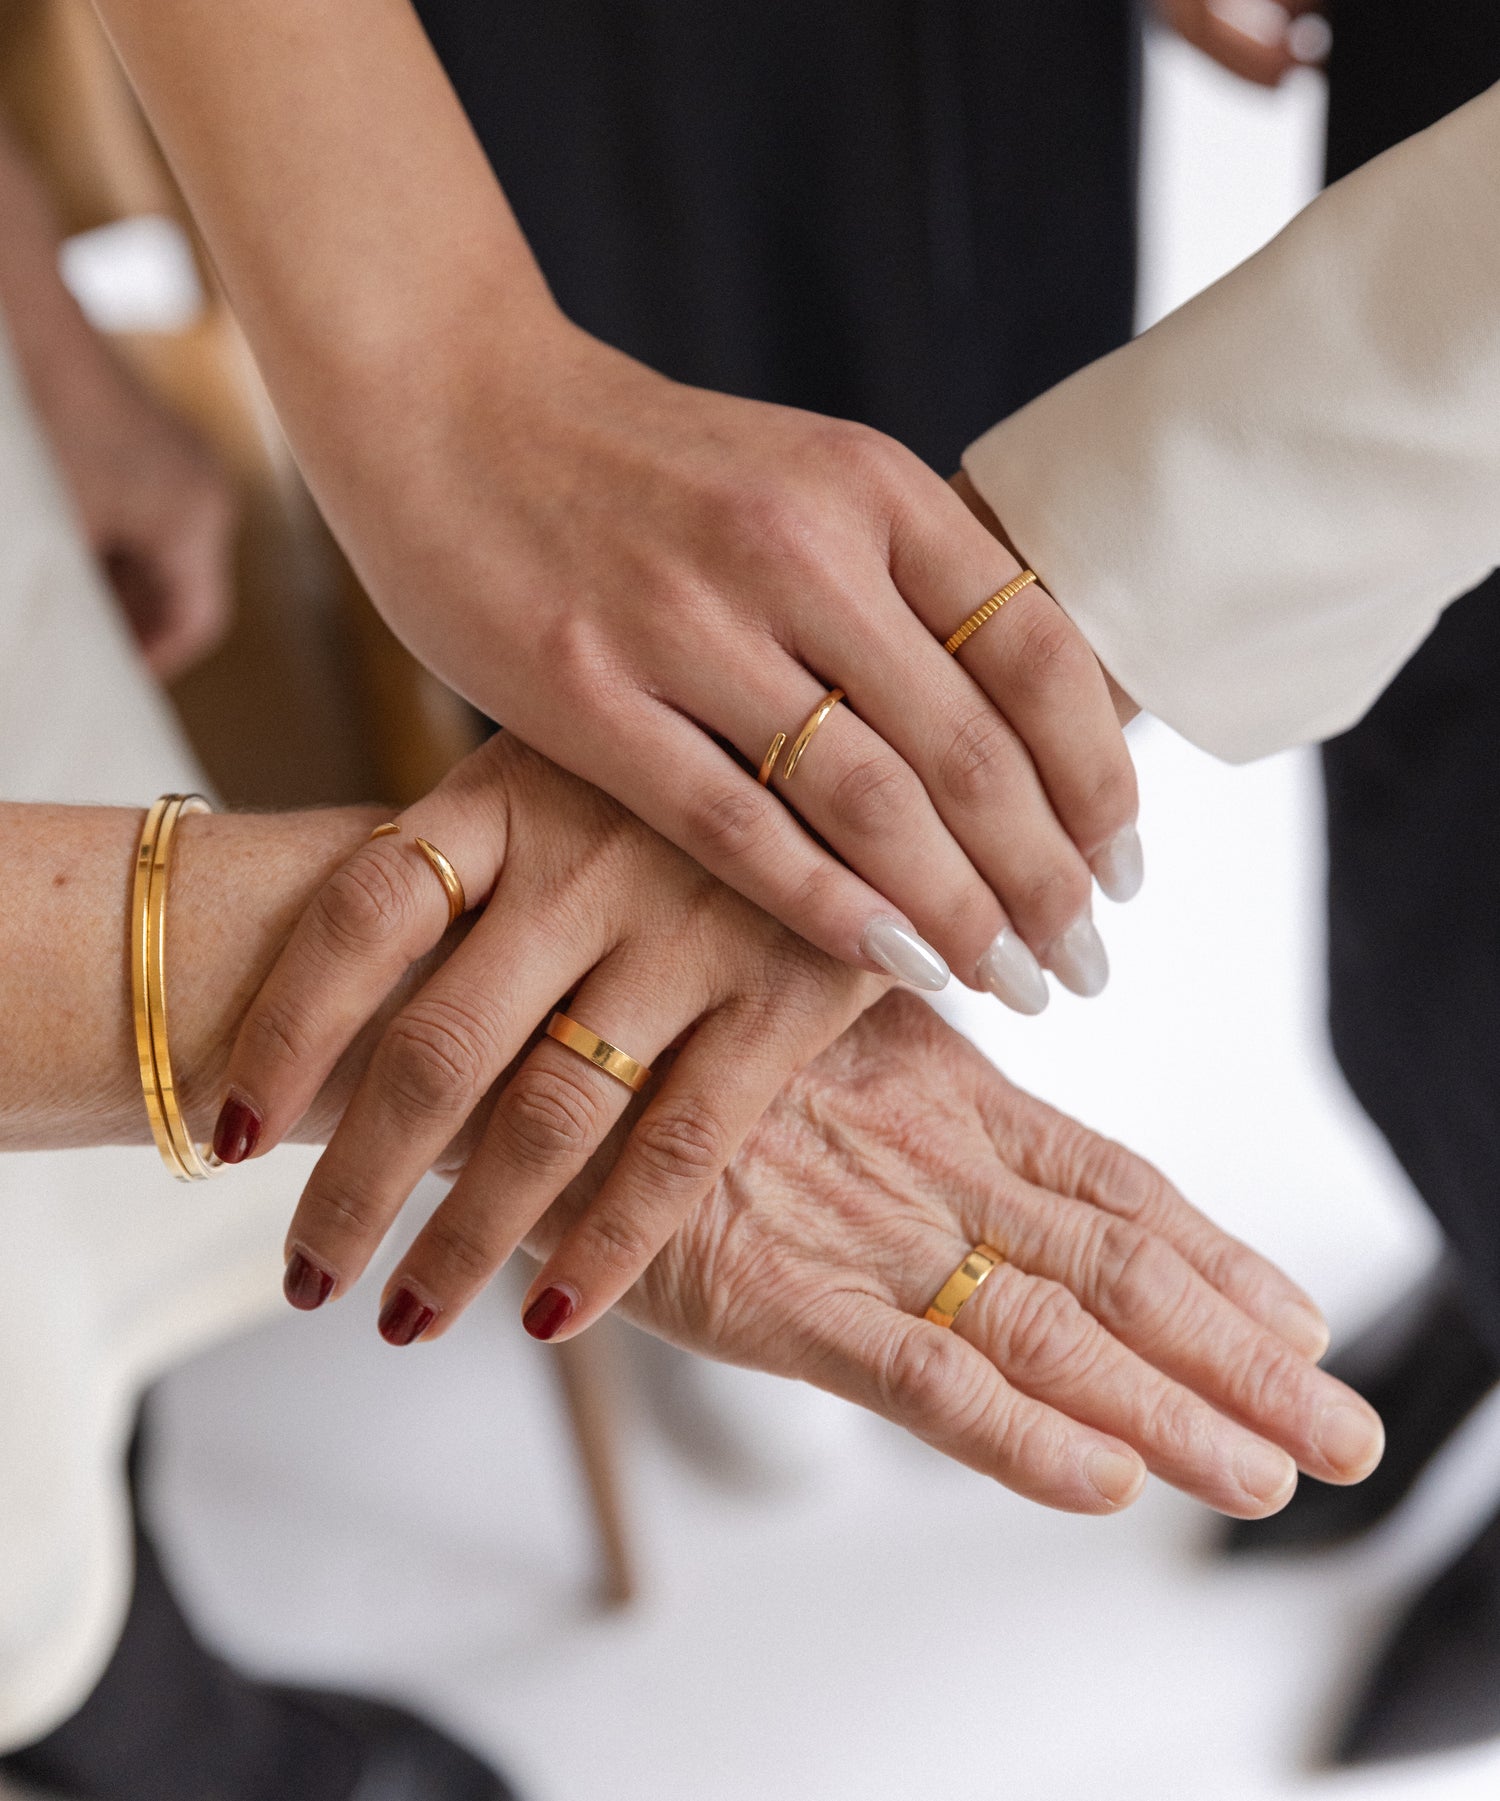 Hands modeling gold rings and bangles